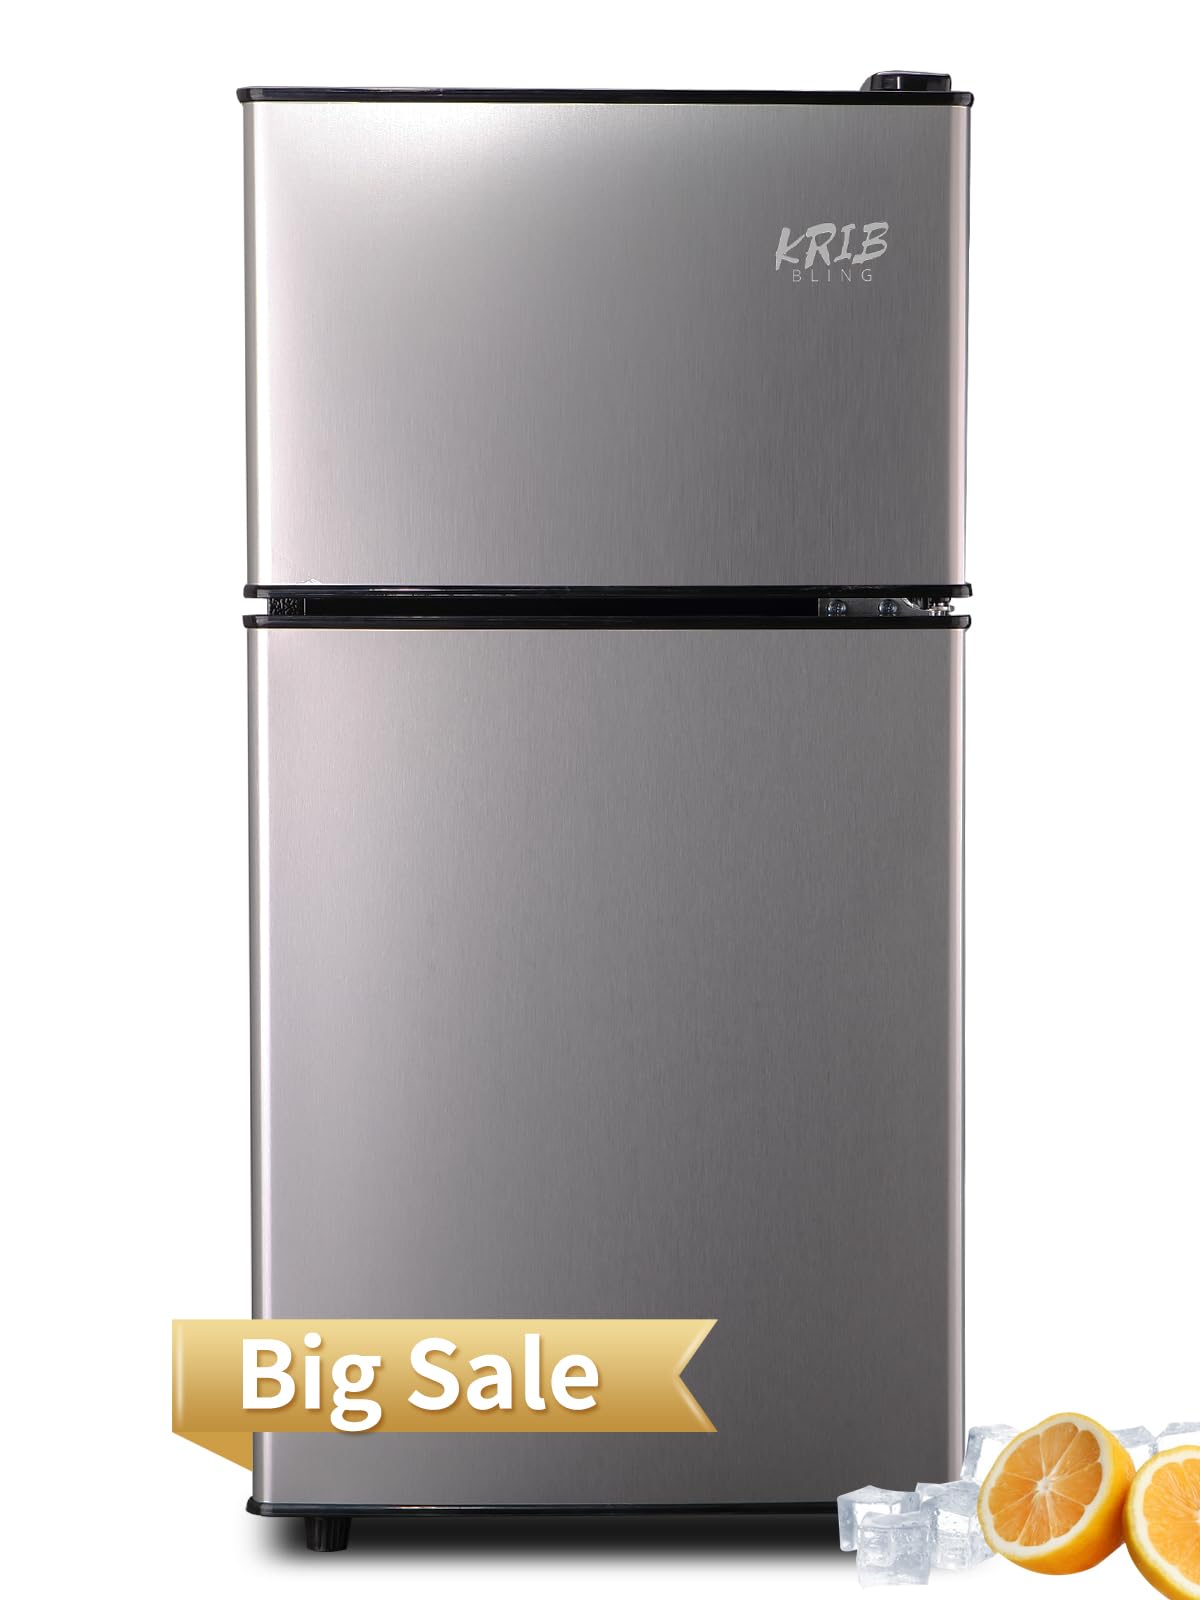 KRIB BLING Compact Refrigerators with Freezer, 3.5 Cu.ft Mini Fridge with 7 Level Temp Adjustable Thermostat, Small Fridge for Apartment, Office, Basement, Silver